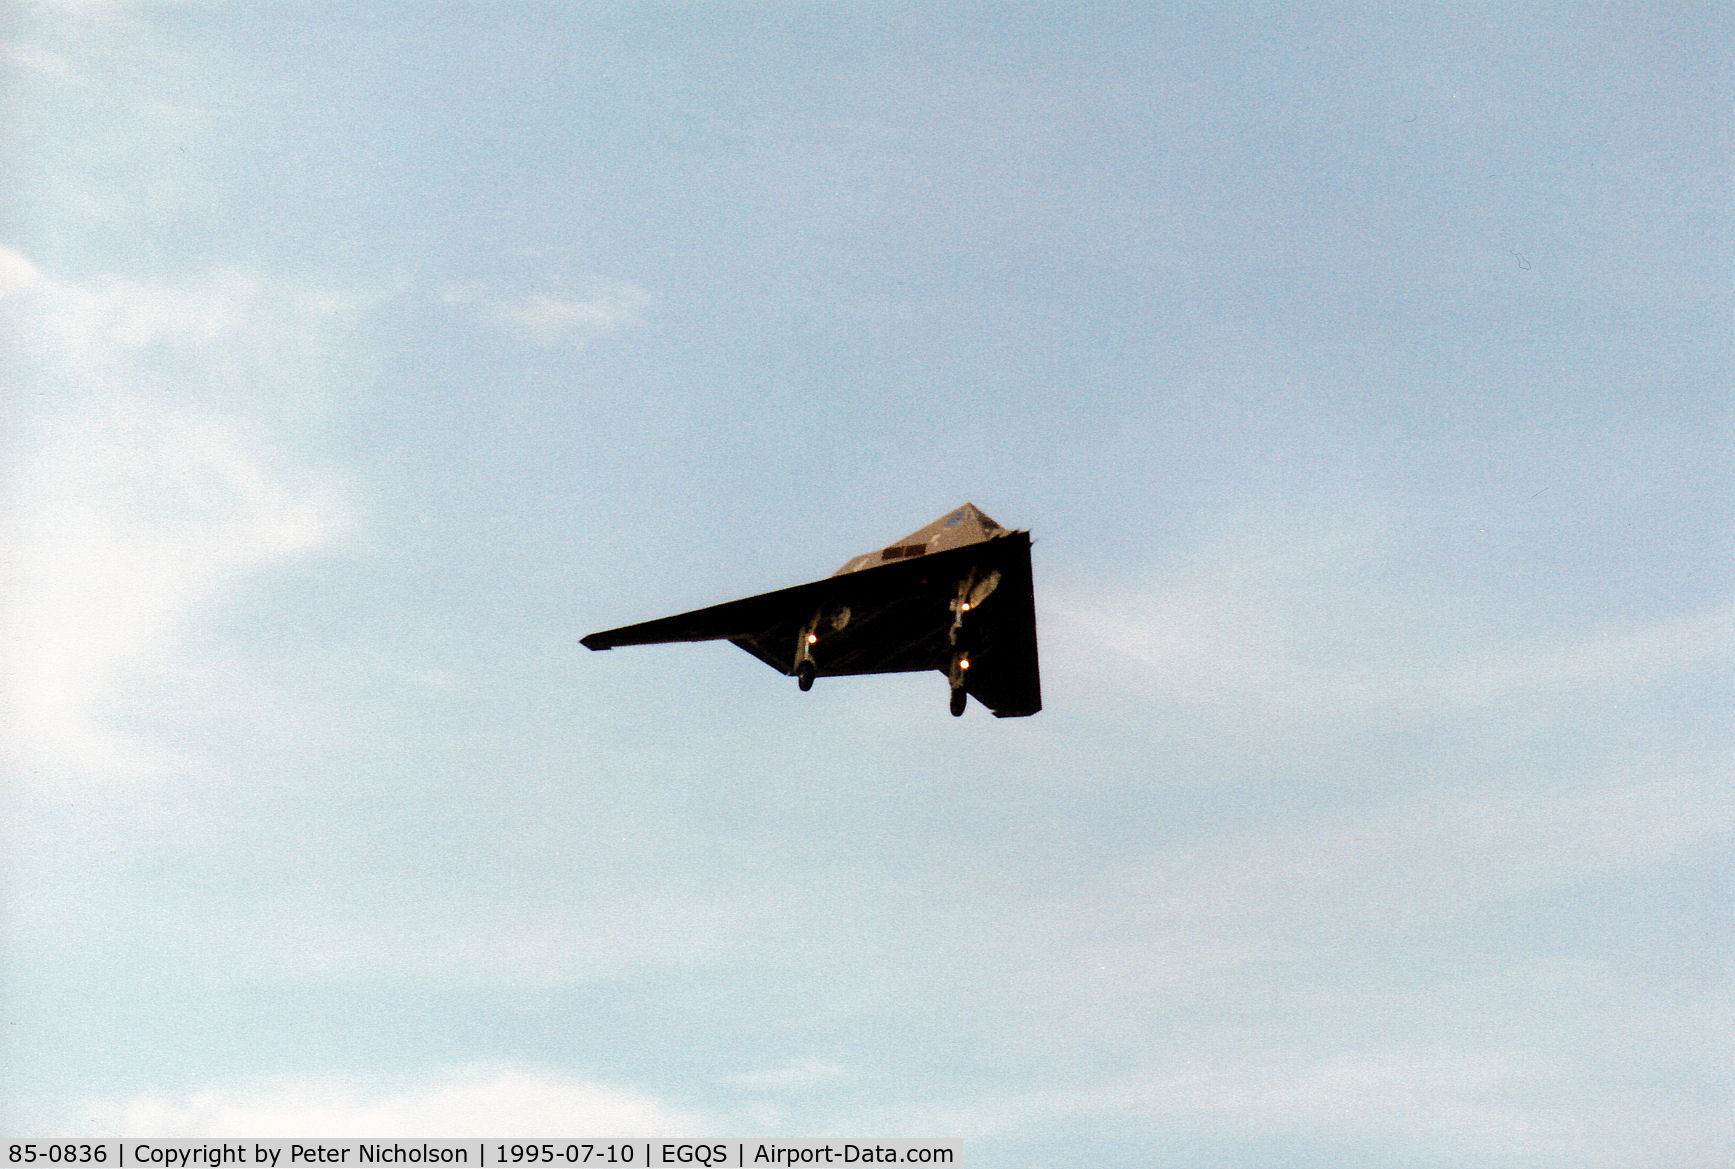 85-0836, 1985 Lockheed F-117A Nighthawk C/N A.4058, F-117A Nighthawk, callsign Stealth 2, of 9th Fighter Squadron/49th Fighter Wing at Holloman AFB on a practice approach to Runway 10 at RAF Lossiemouth in the Summer of 1995.